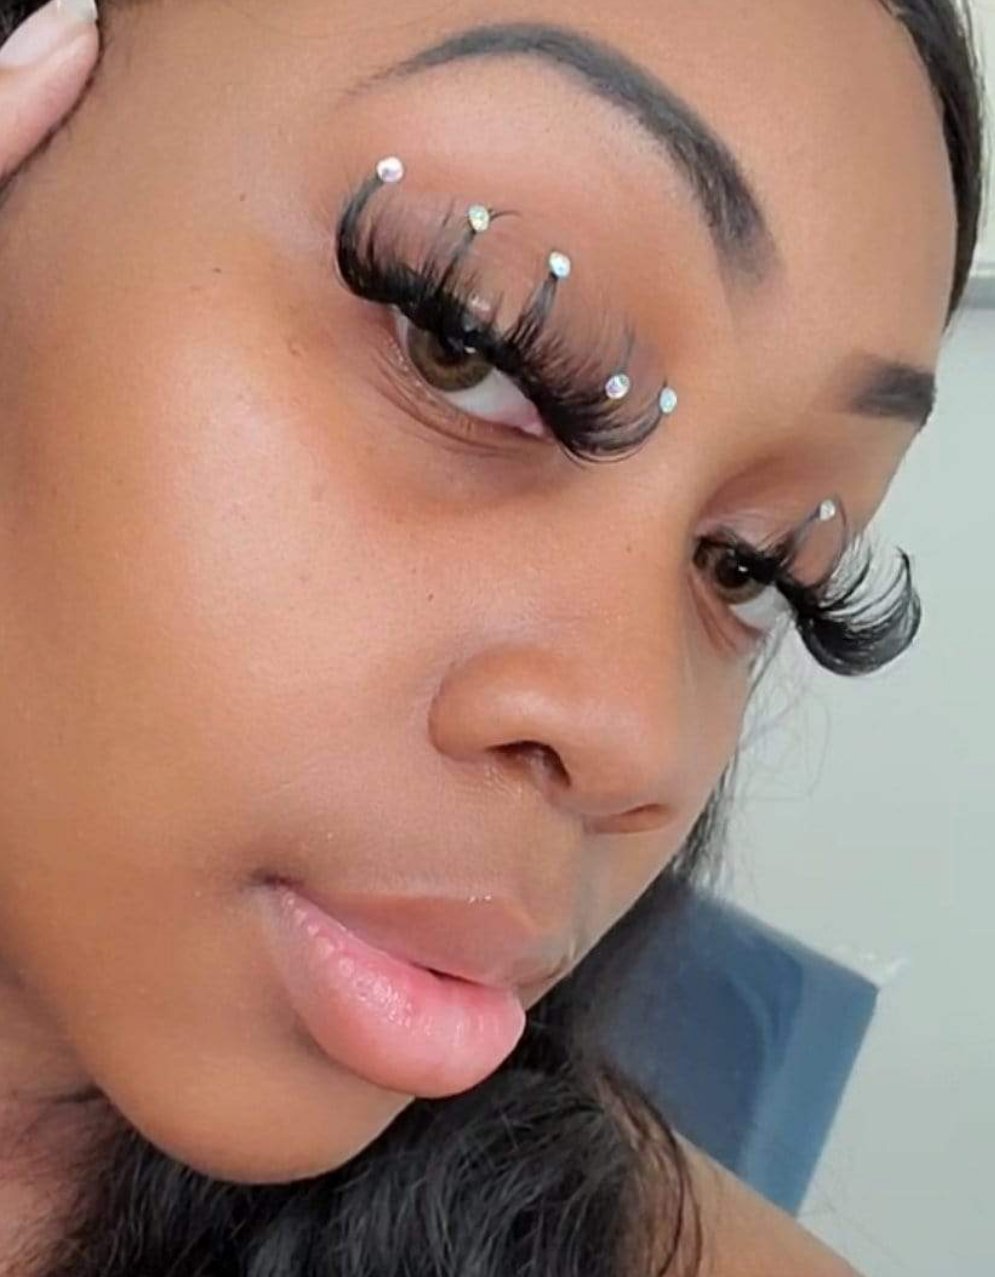 Icy - Mink Envy Lashes